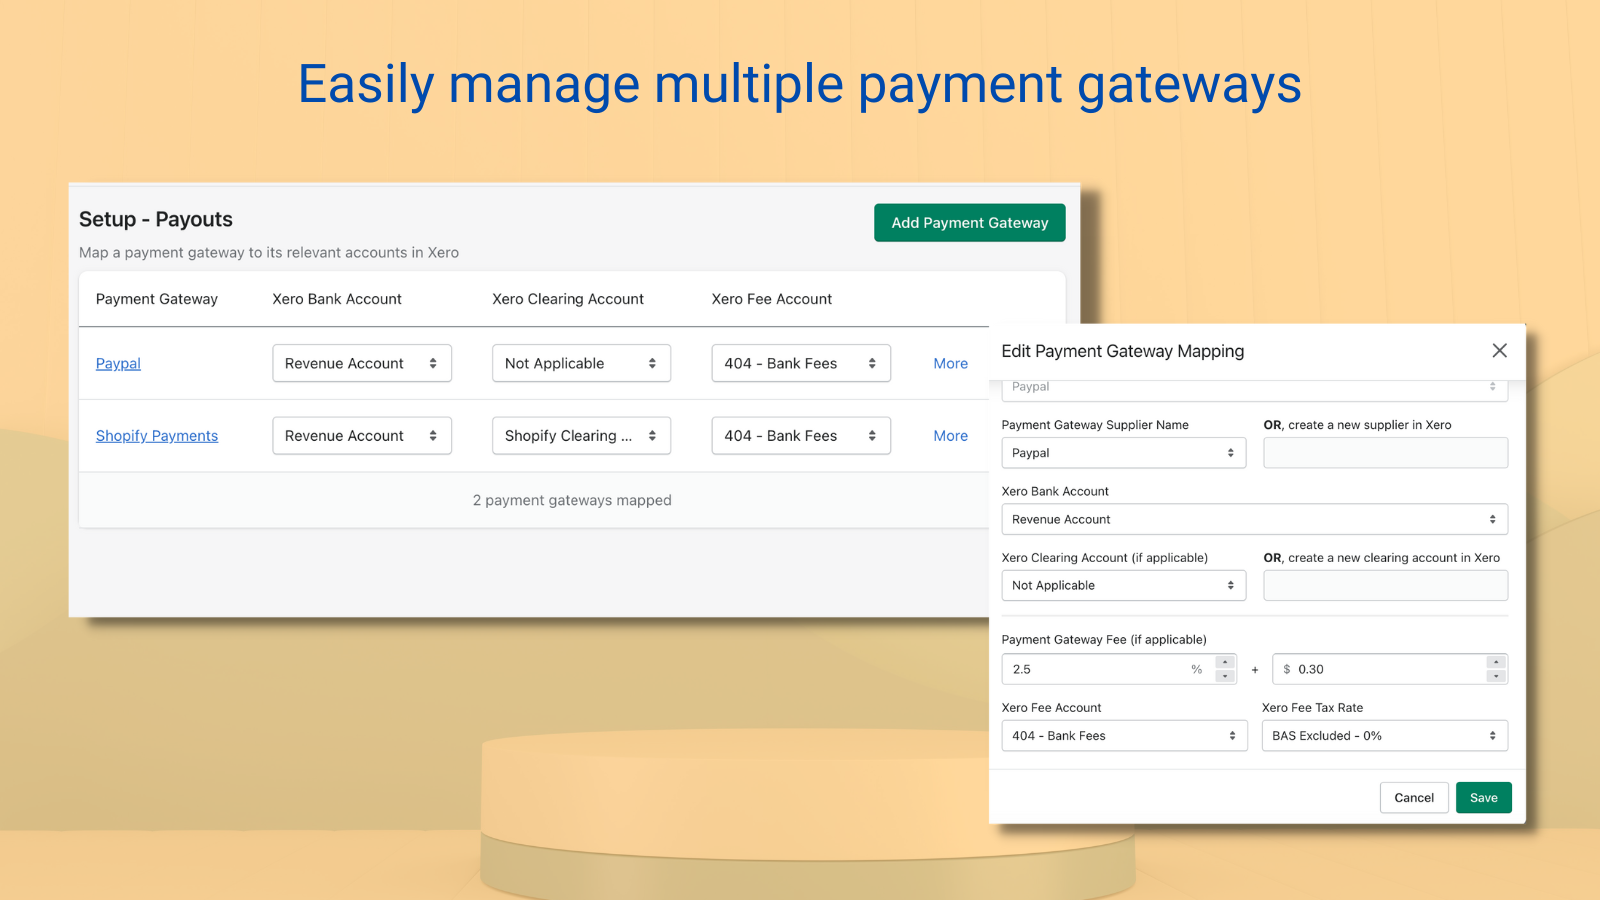 Manage multiple payment gateways (Shopify, Paypal, Afterpay etc)